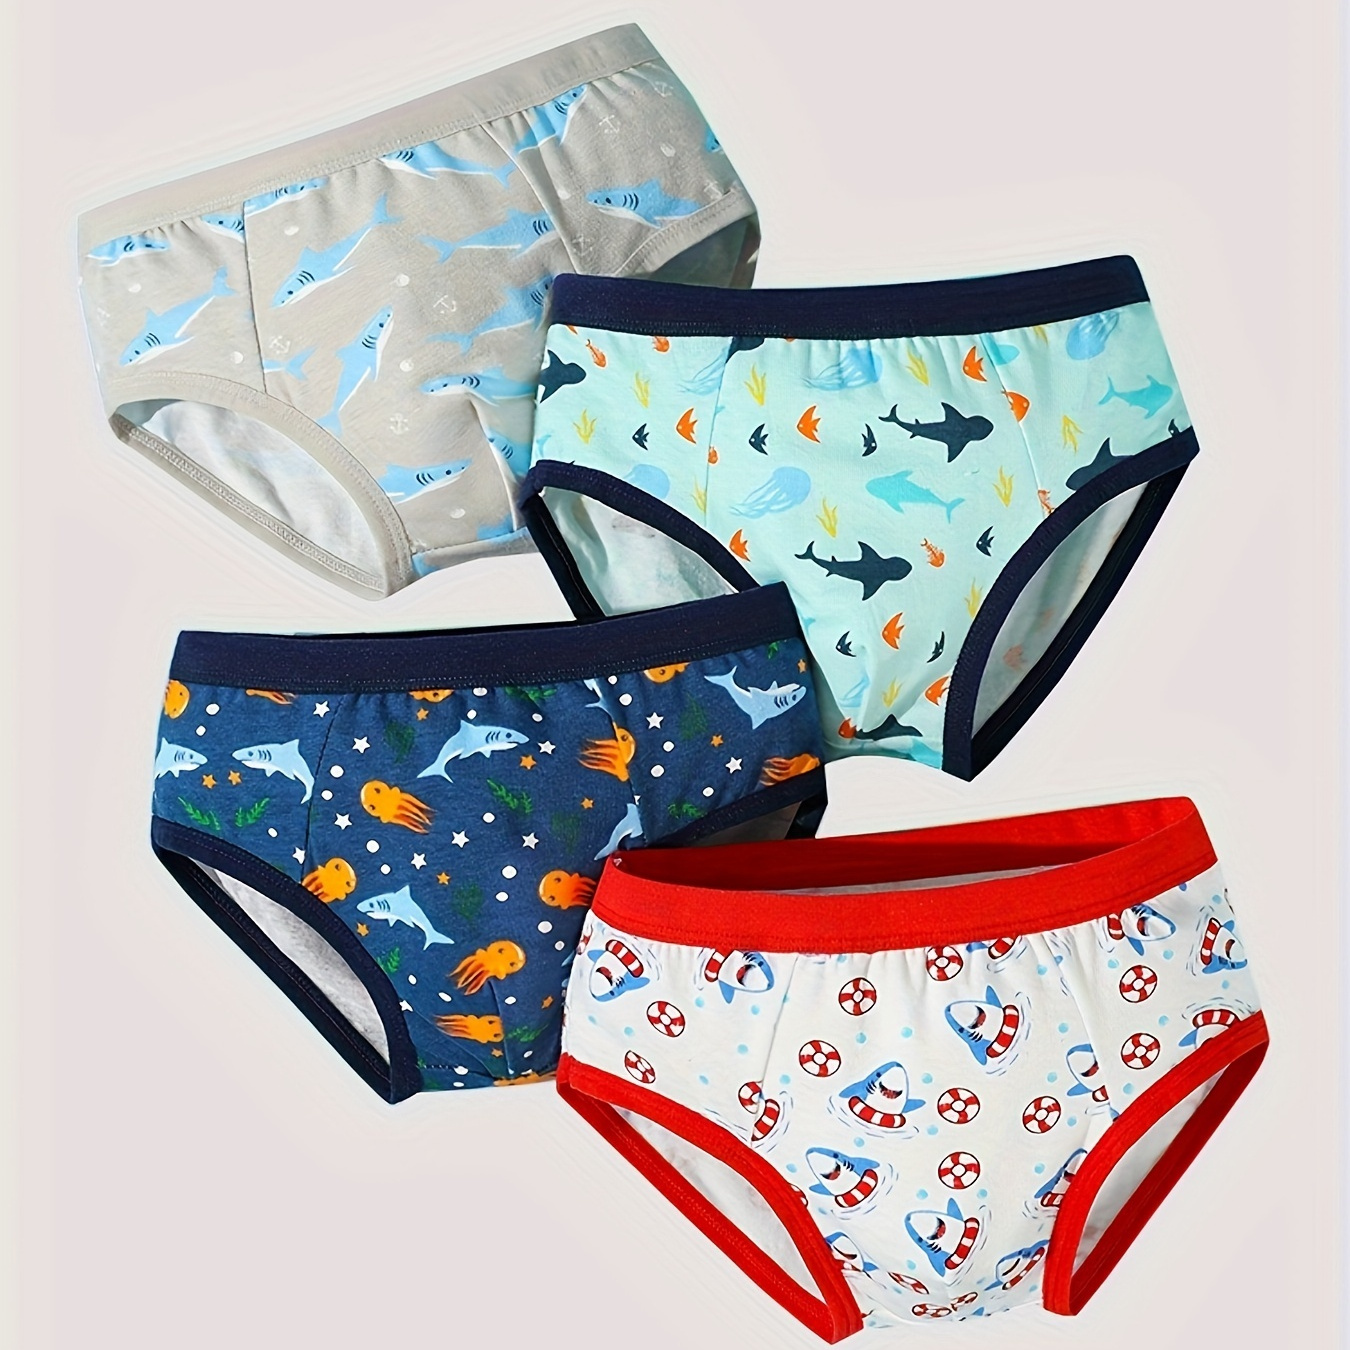 

4pcs Boy's Cartoon Shark Pattern Briefs, Student Simple Style Boxers, Comfortable & Breathable Cotton Underwear For Daily Wear